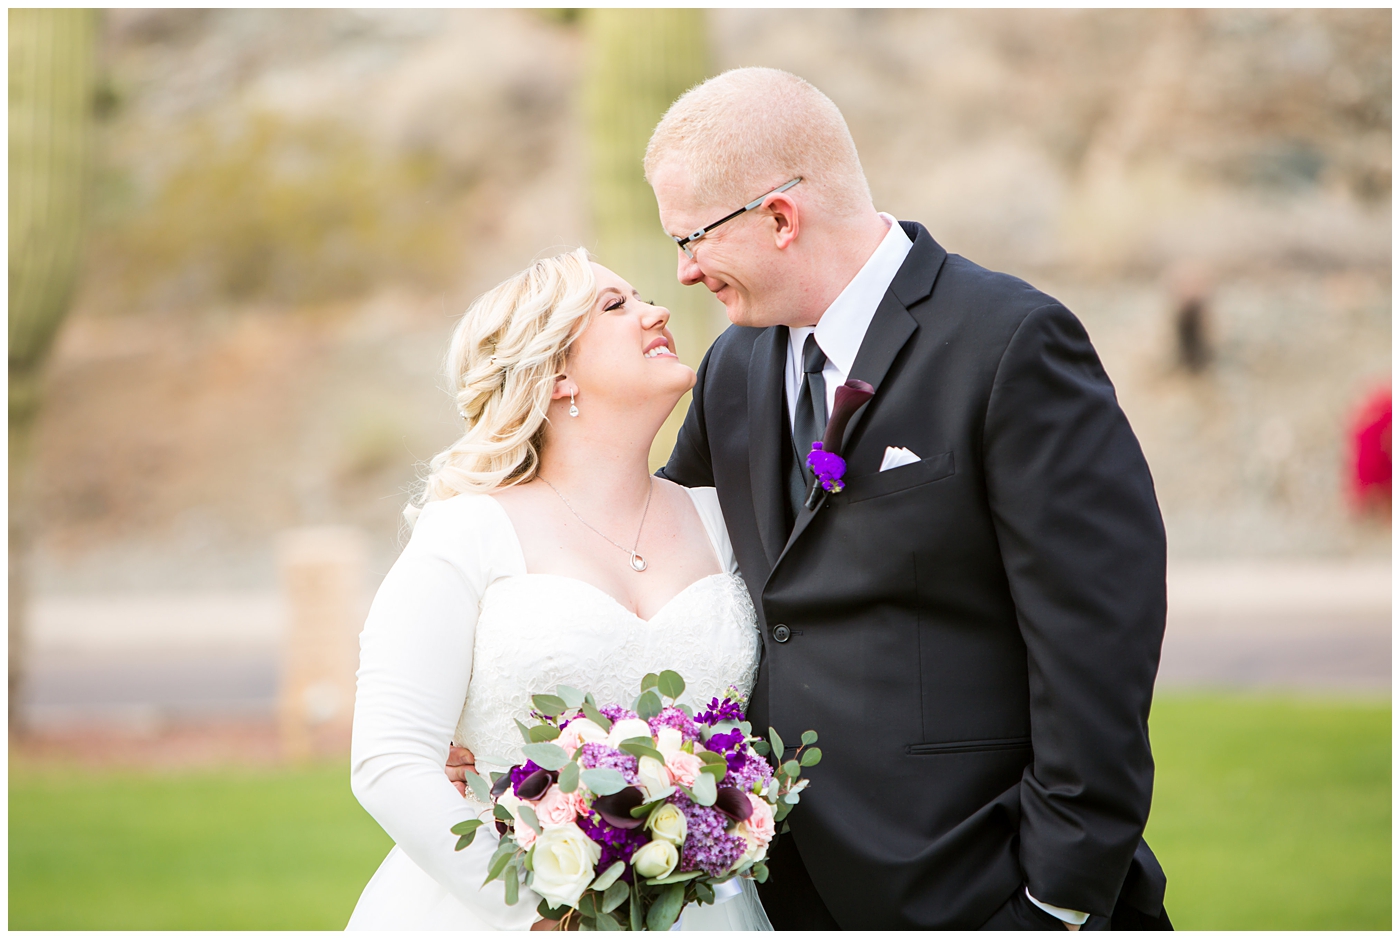 blonde bride in long sleeve wedding dress with purple and white flower bouquet and groom in black suit with purple calla lilly boutonniere wedding day portrait